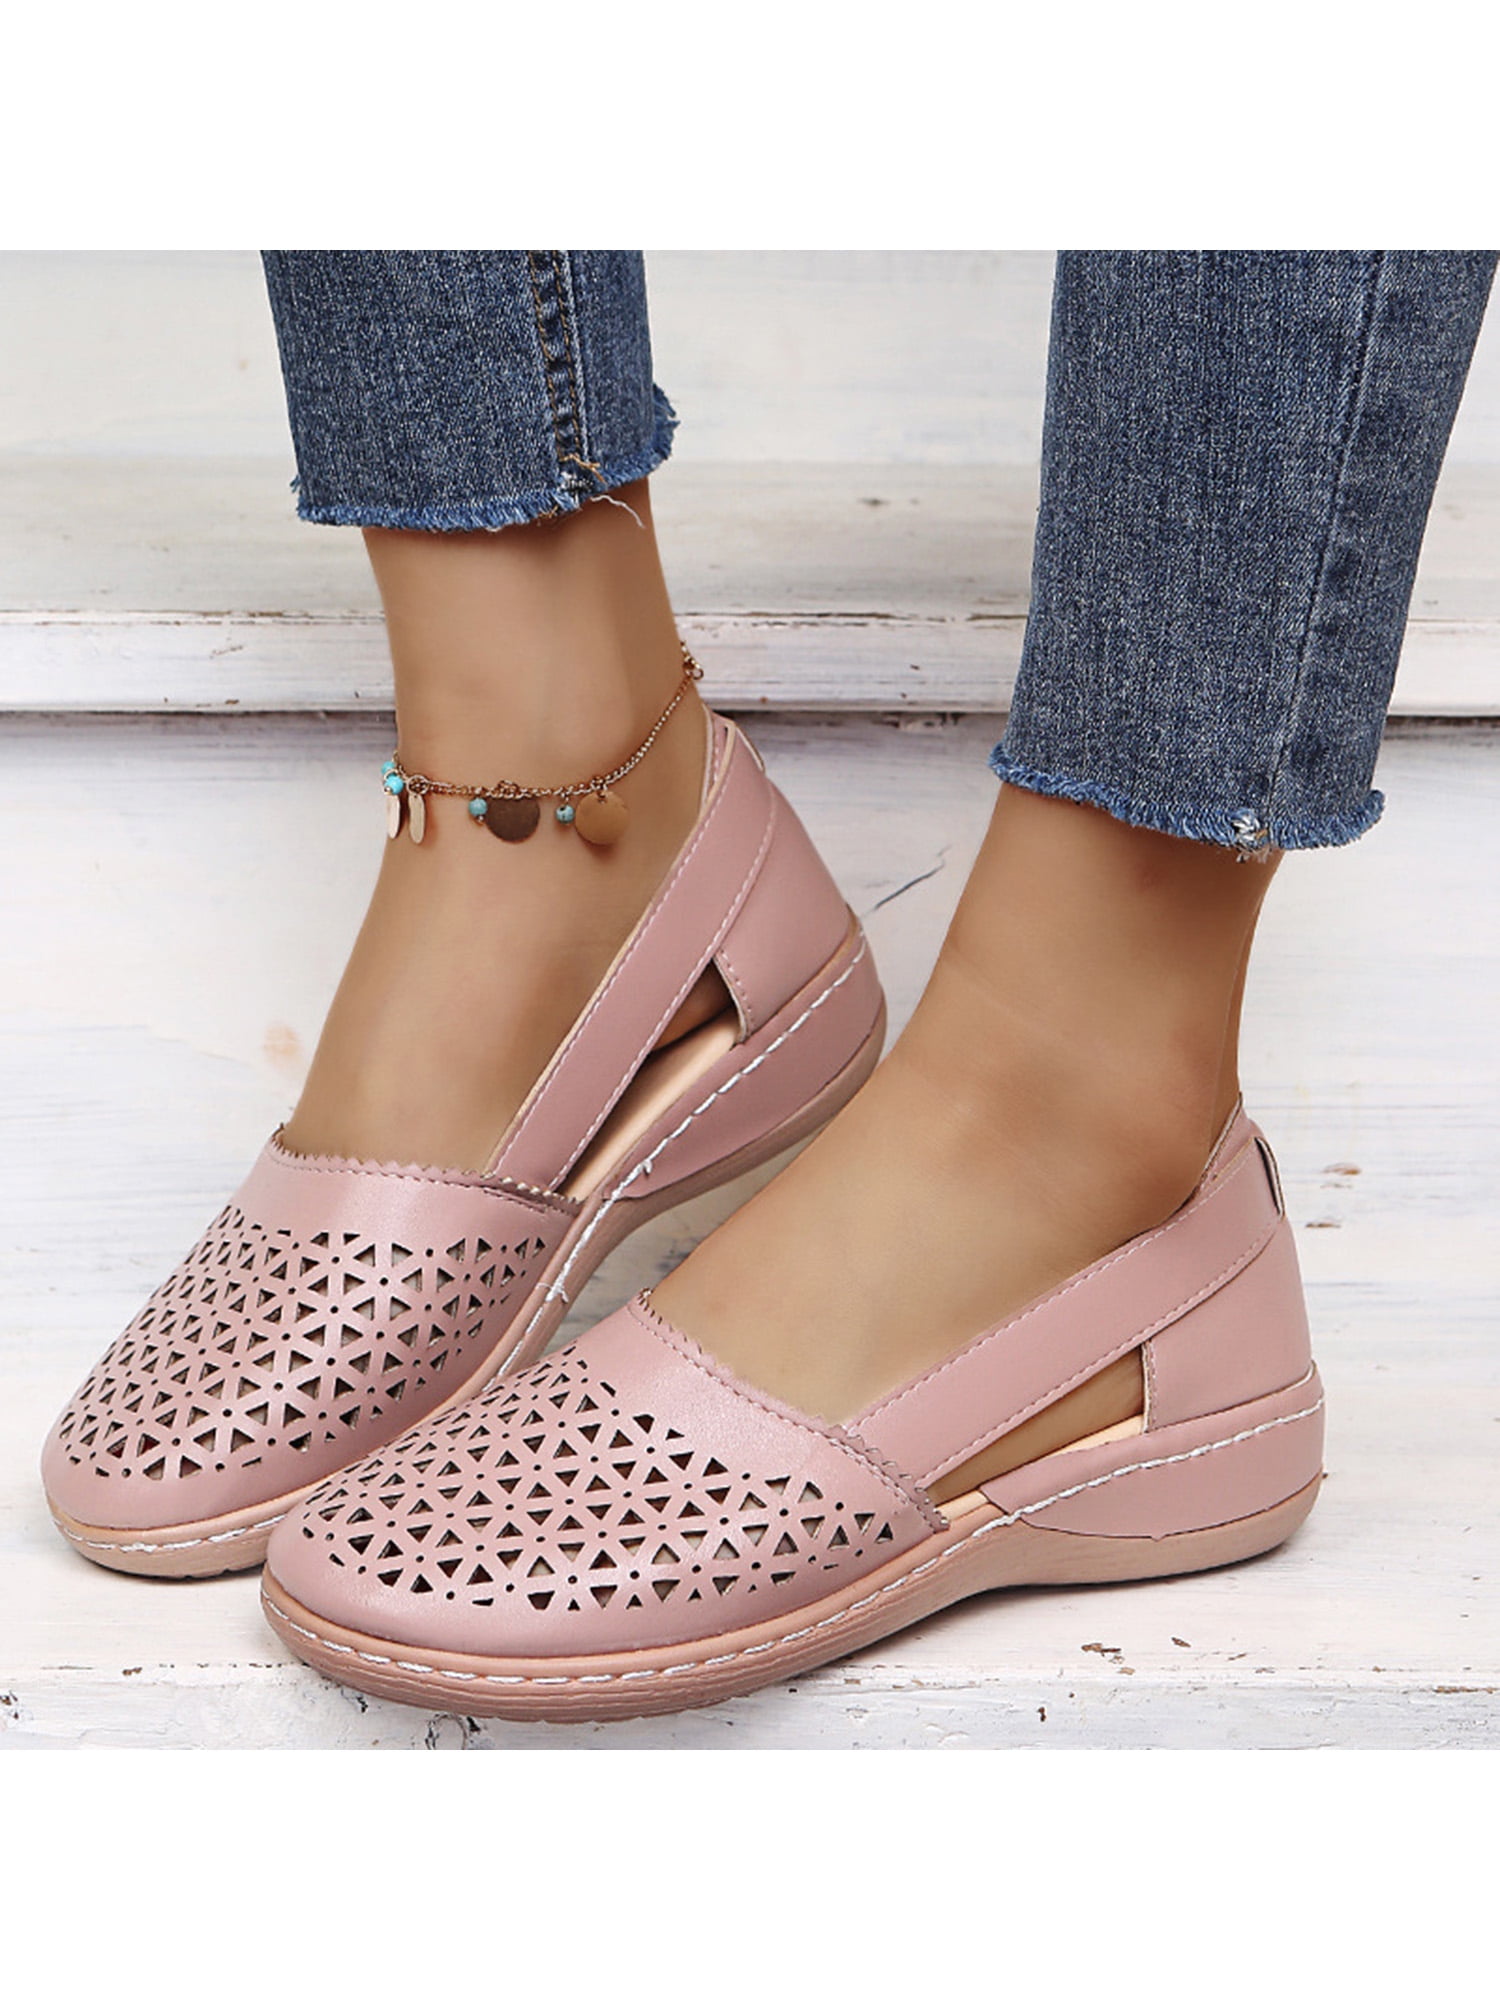 Womens Slip On Loafers Hollow Out Breathable Roman Sandals Casual Comfort Walking Flats Shoes 